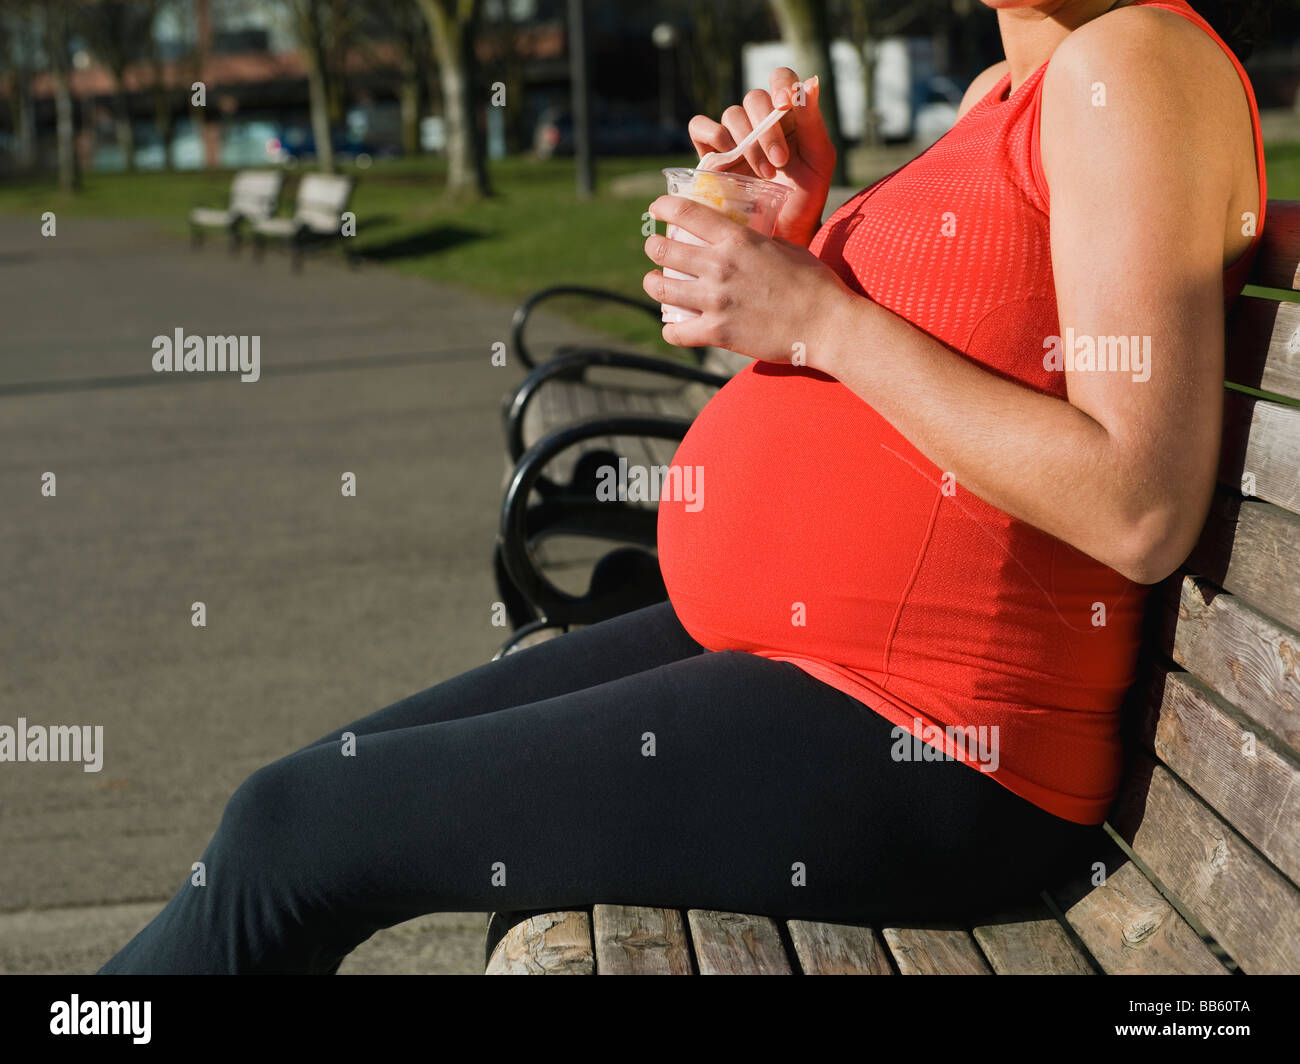 Pregnant Middle Eastern woman eating fruit in park Banque D'Images